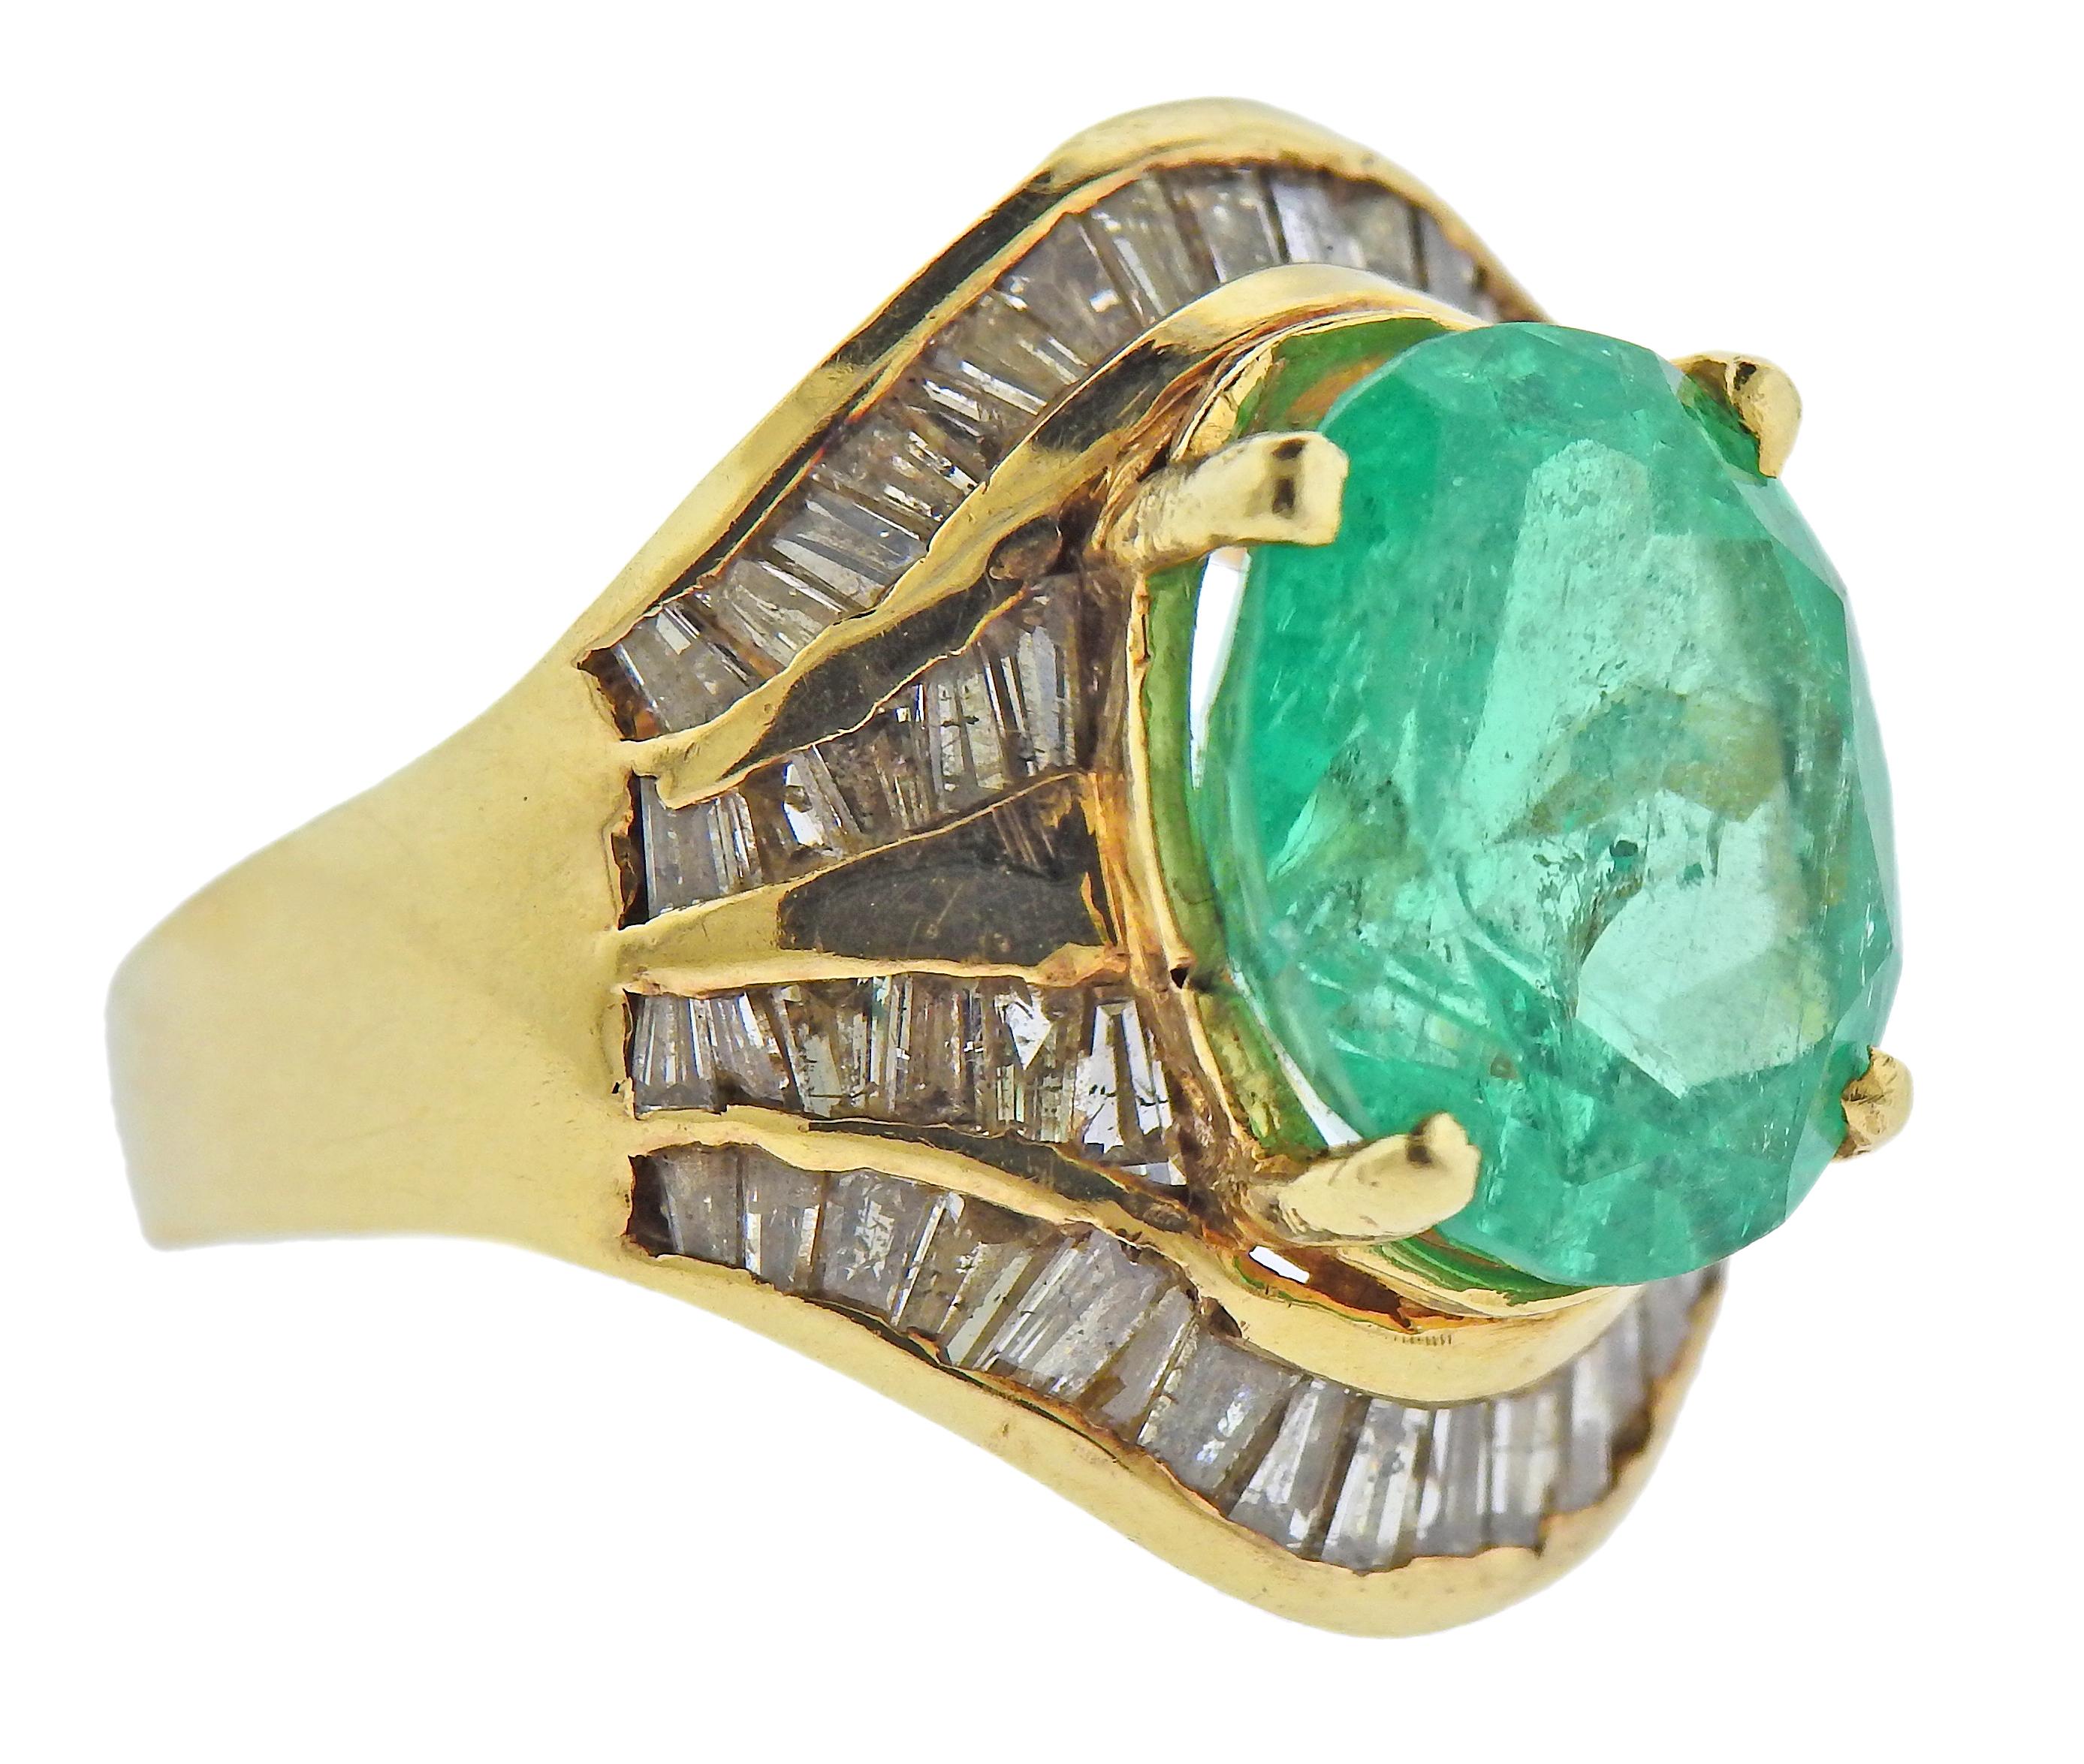 14k gold cocktail ring, set with oval approx. 9 carat emerald (measuring 14.1 x 12.35 x 9.15mm) surrounded with approx. 0.70ctw in diamonds. Ring size - 6.75, ring top - 22mm wide. Marked 14k. Weight - 12.8 grams.